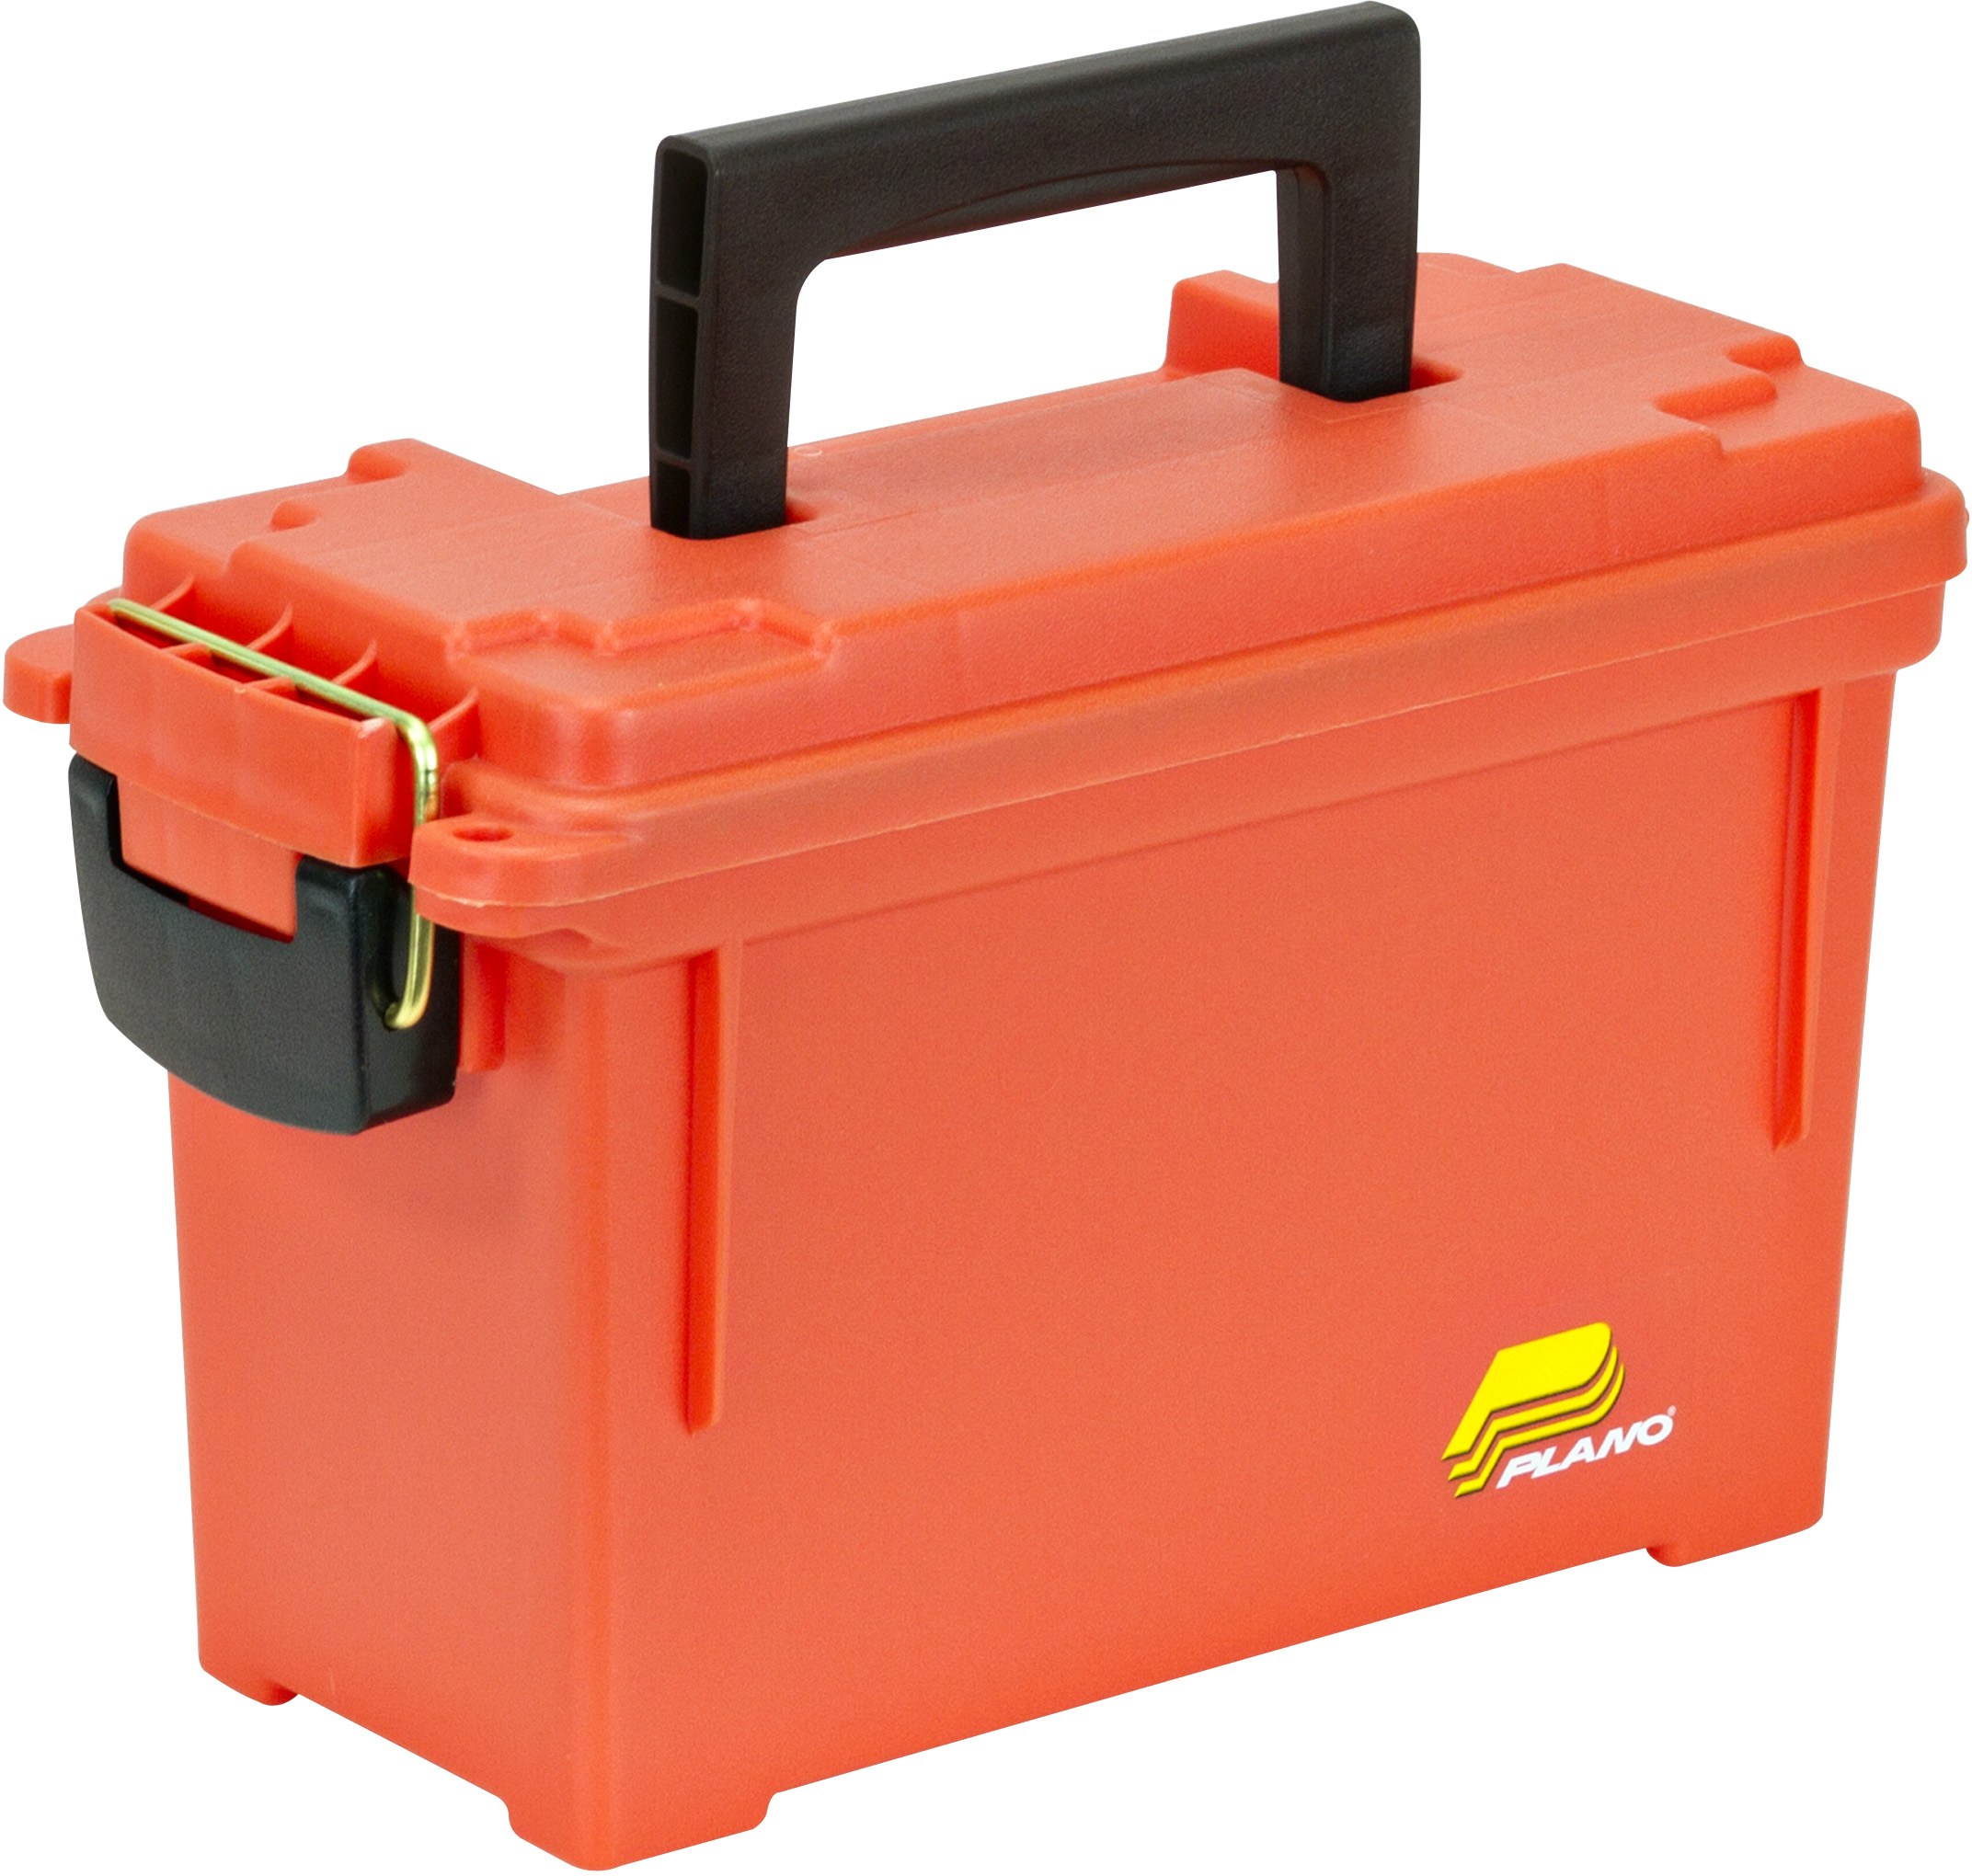 Plano Marine Box  Up to 16% Off 5 Star Rating Free Shipping over $49!